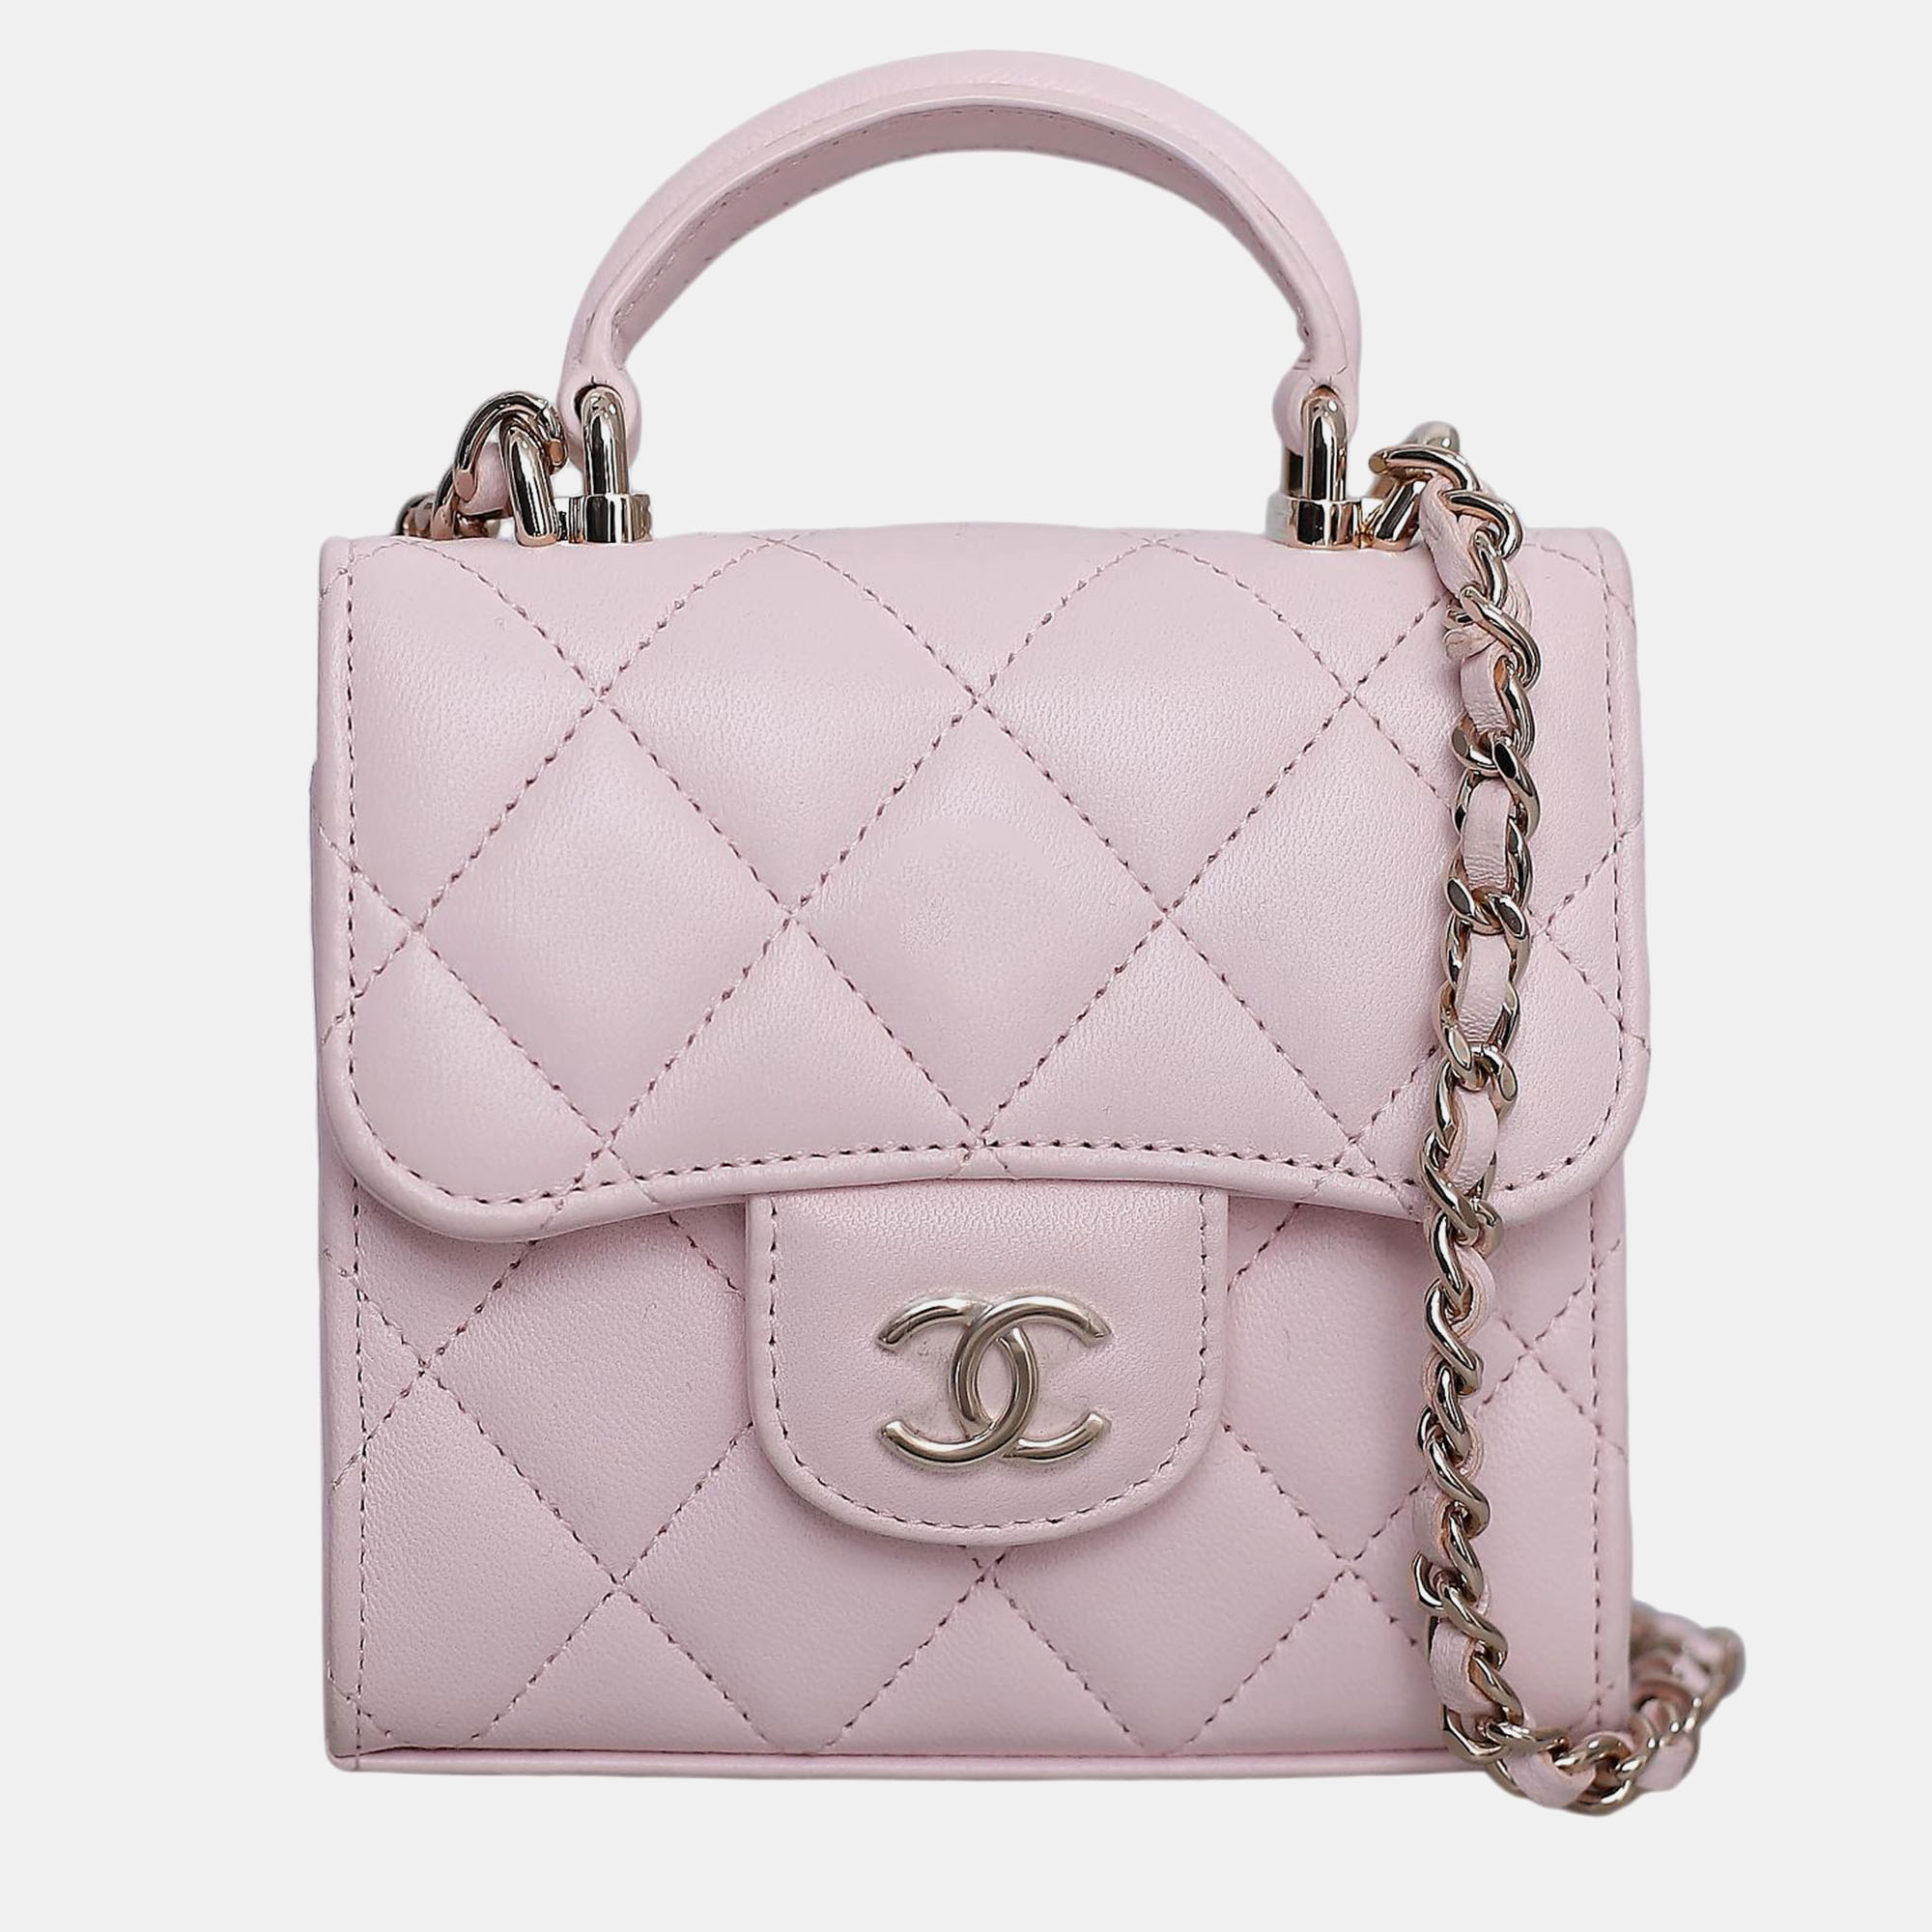 Chanel pink leather micro flap top handle bag